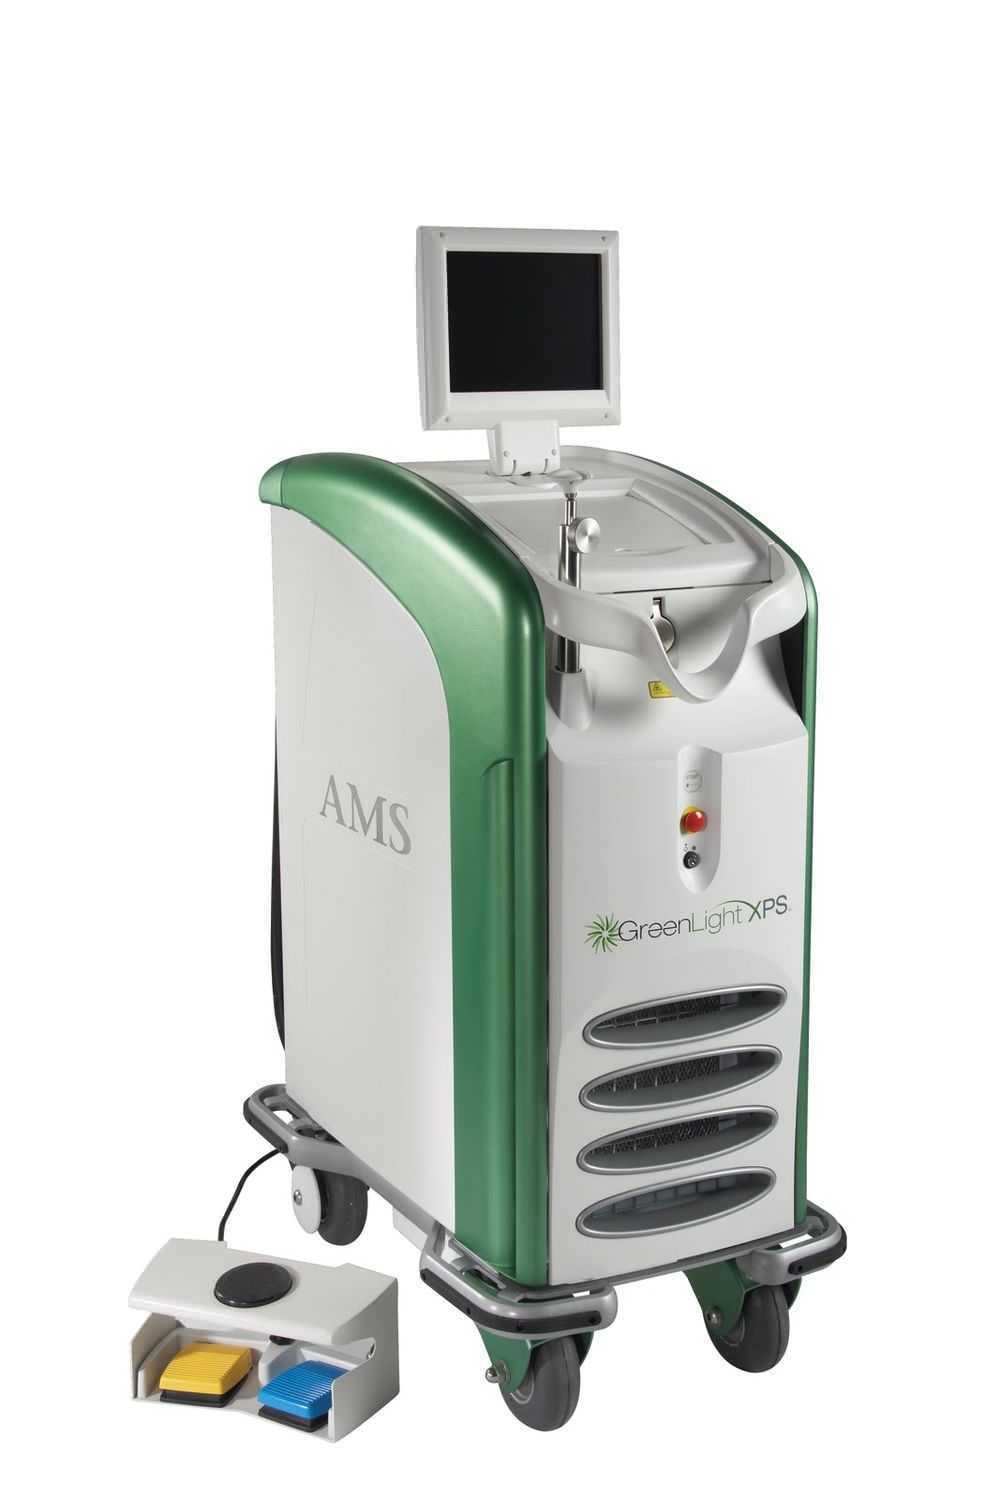 Surgical laser / urological surgery / lithium triborate / on trolley GREENLIGHT XPS™ American Medical Systems